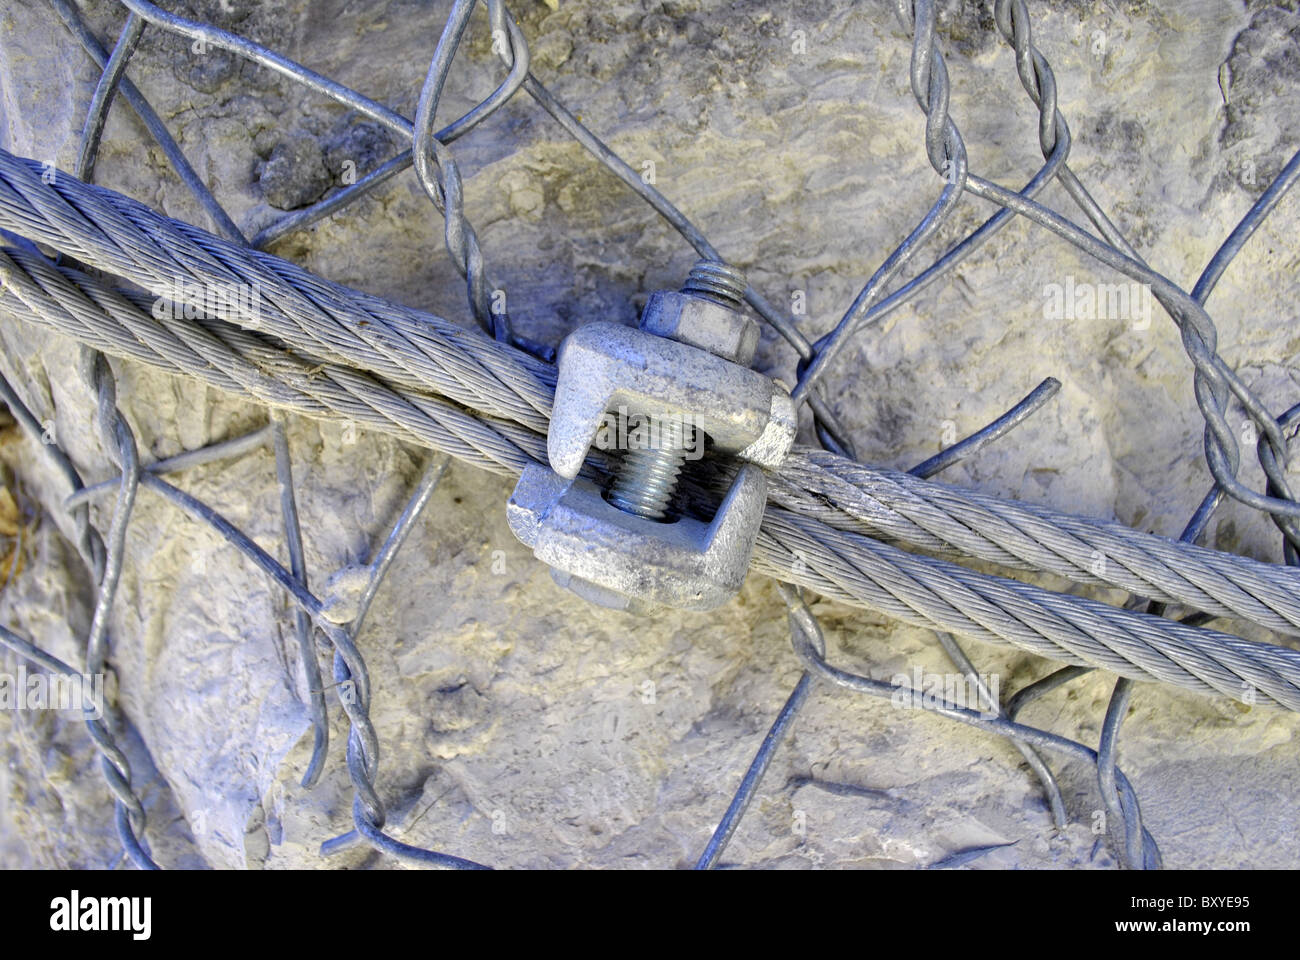 wire mesh to contain rocks and stones fall Stock Photo